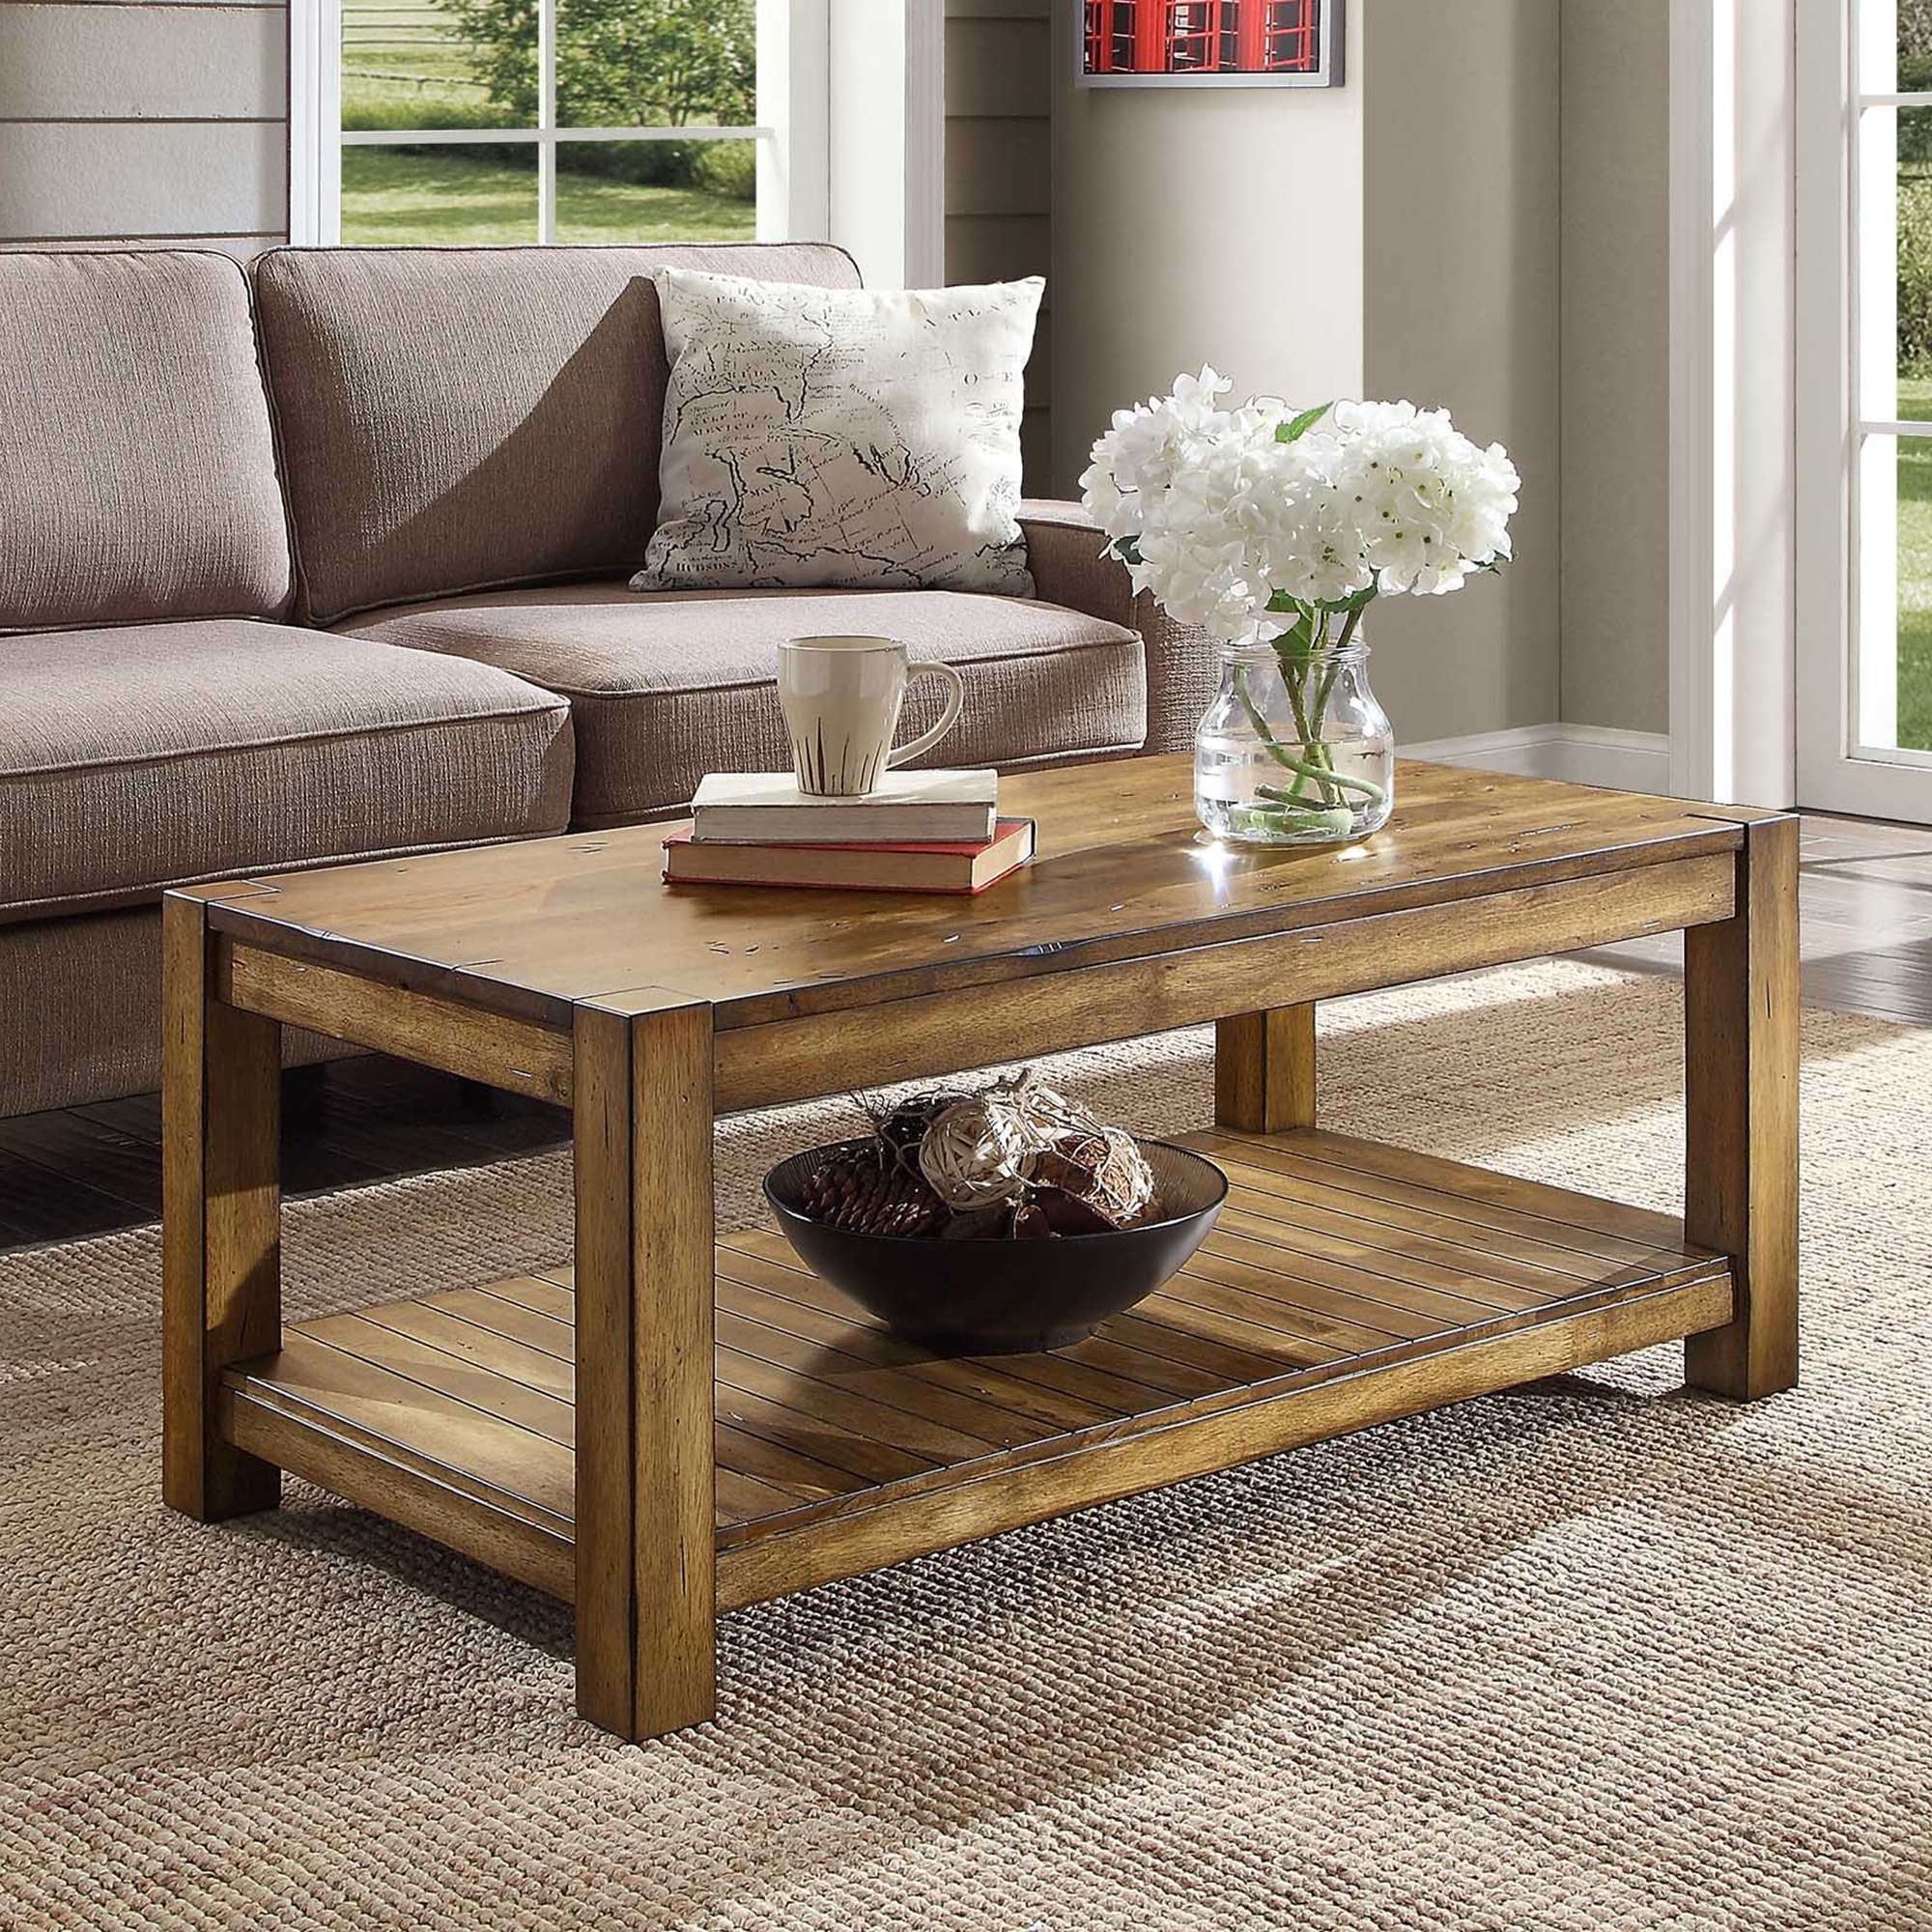 Bryant Solid Wood Coffee Table, Rustic Maple Brown Finish – Walmart Pertaining To Brown Rustic Coffee Tables (View 2 of 15)